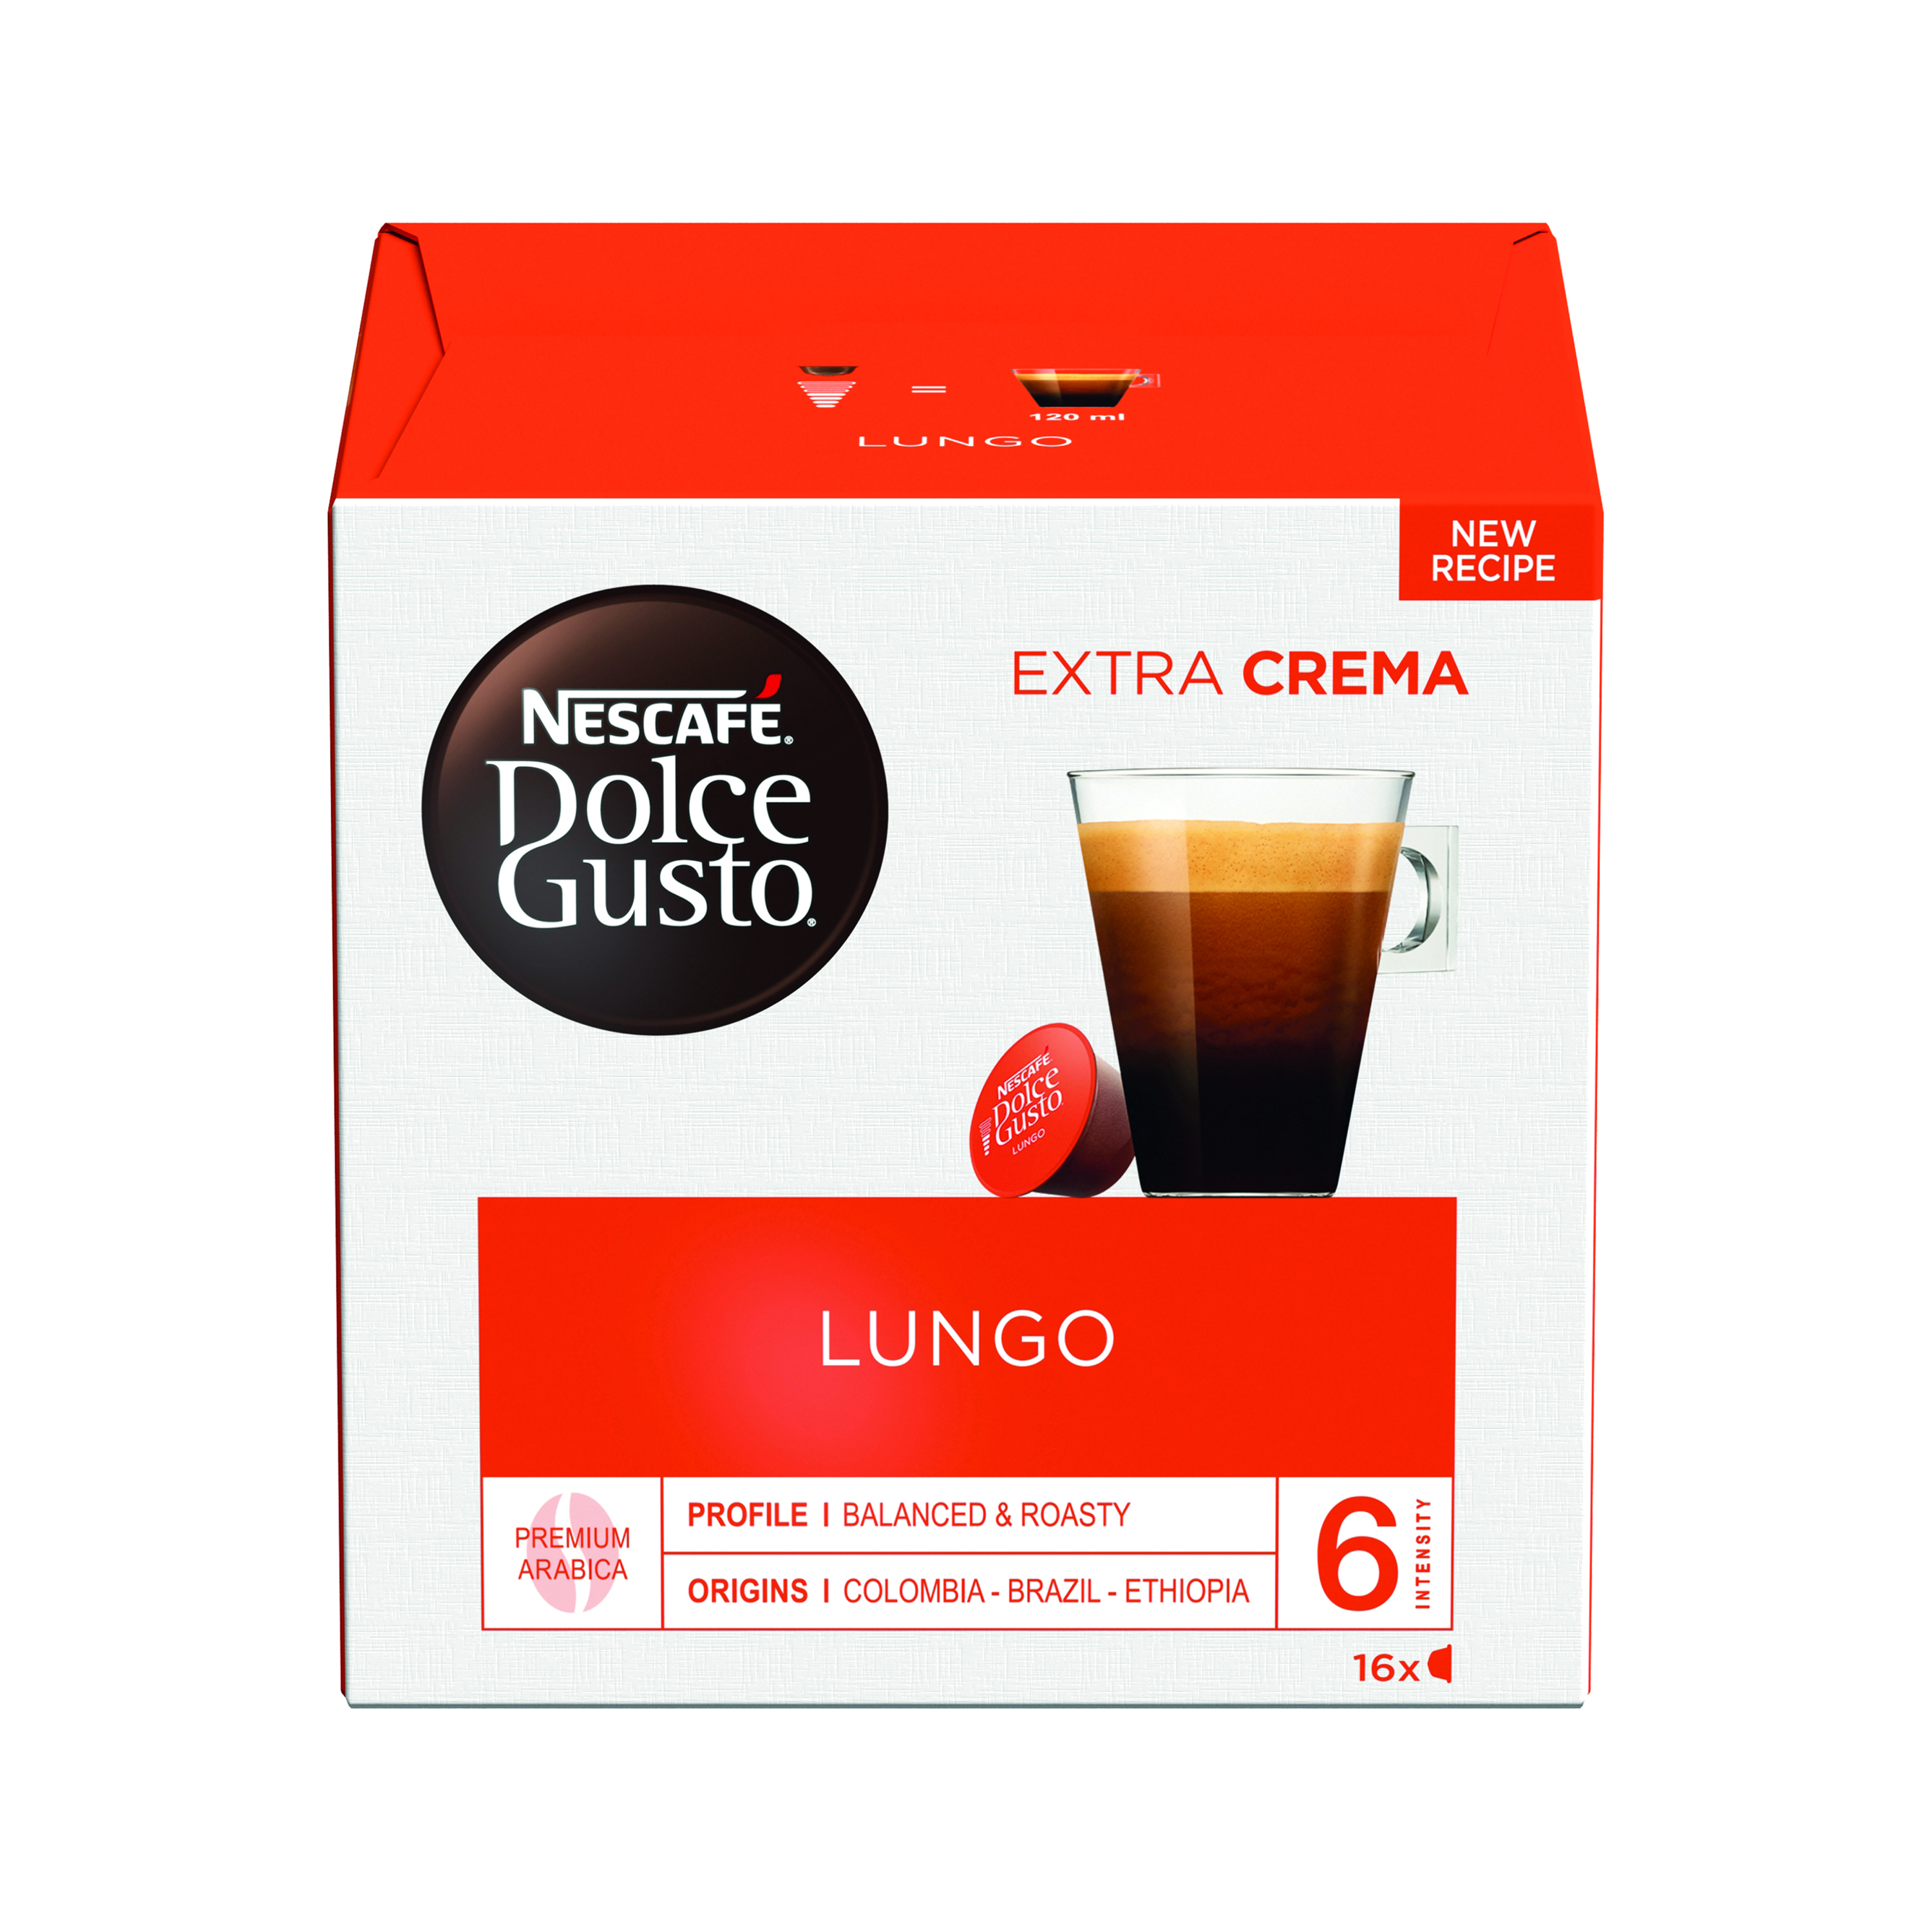 Nescafe Caffe Lungo Capsules for Dolce Gusto Machine Ref 12019900 Packed 48  (3x16 capsules=48 Drinks)